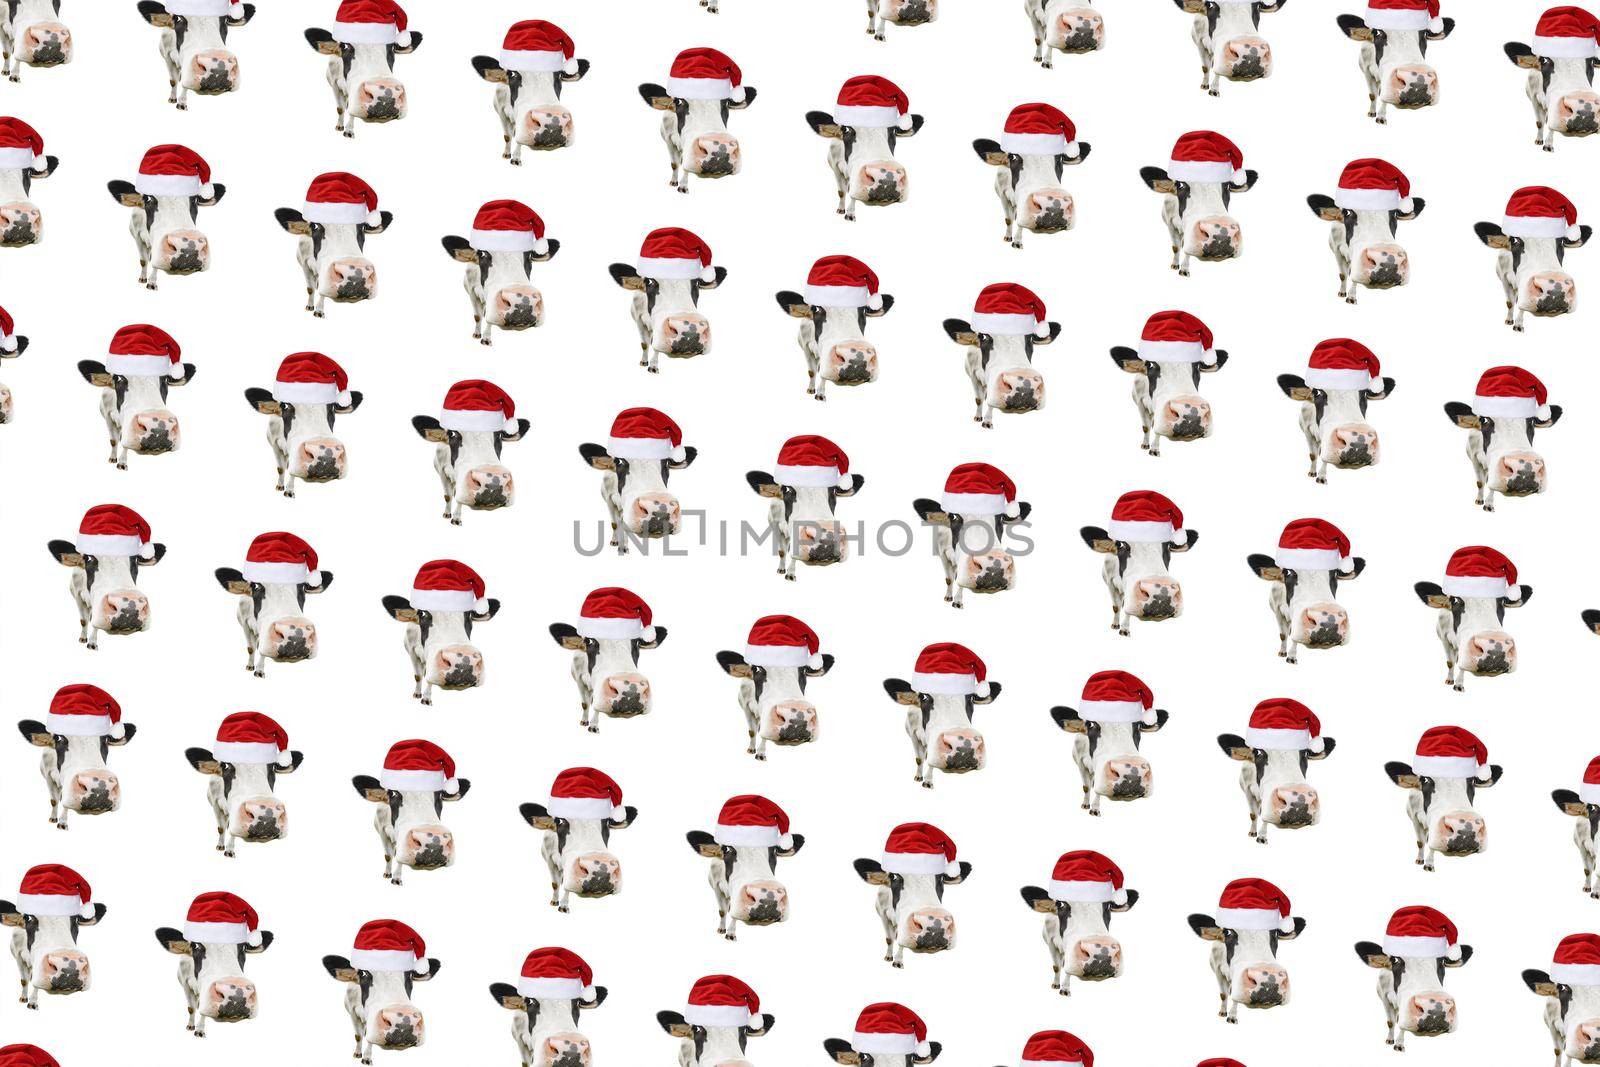 Funny cow isolated in Christmas hat pattern. Spotted Cow portrait isolated on white. Farm animals.